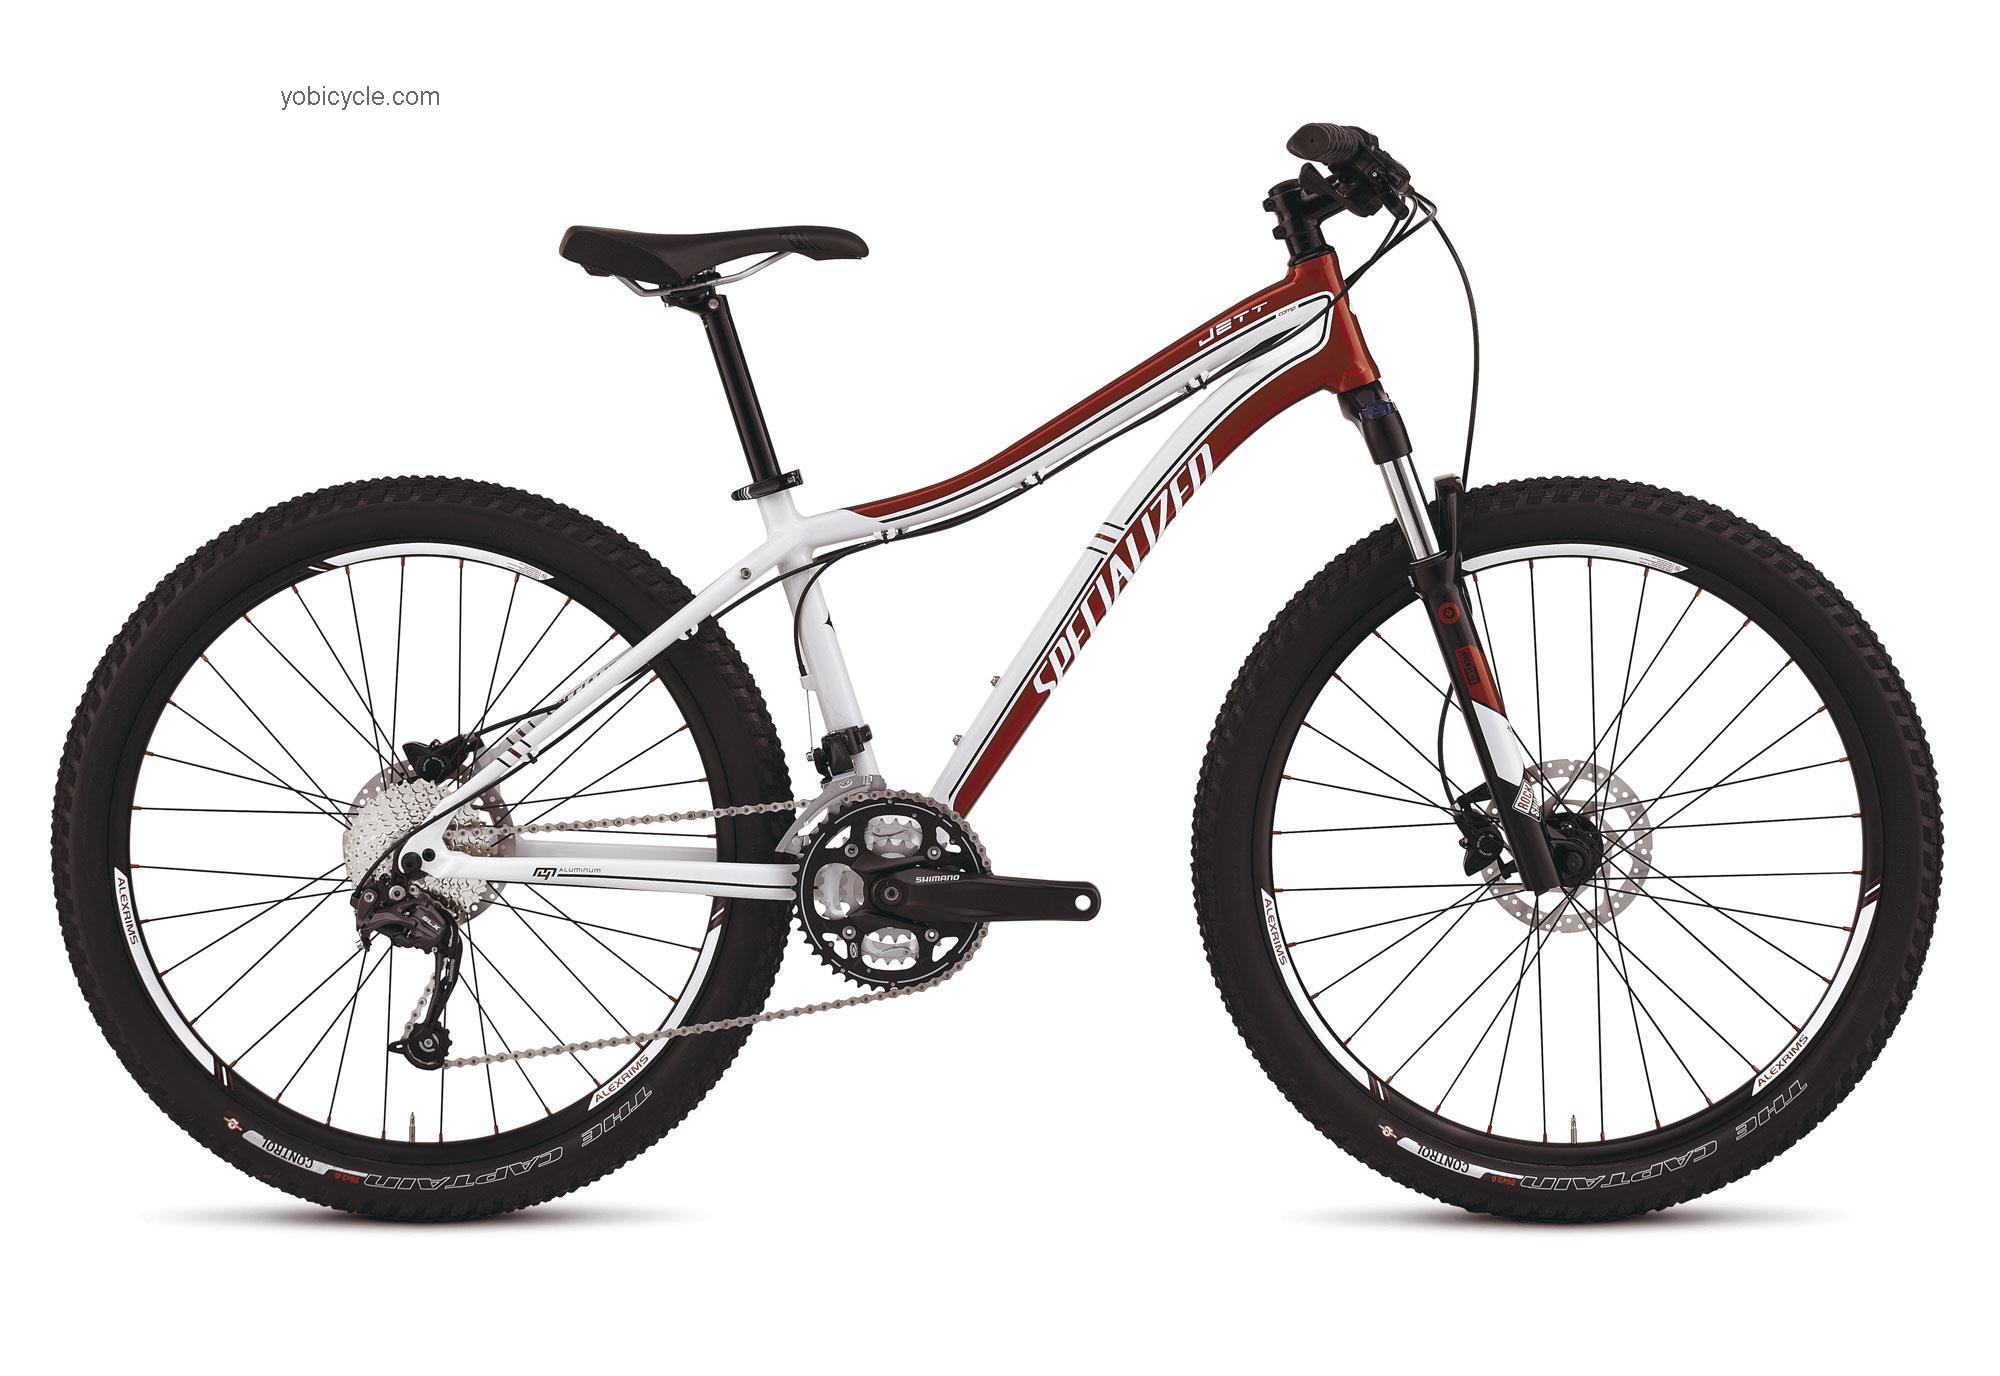 Specialized Jett Comp 2012 comparison online with competitors